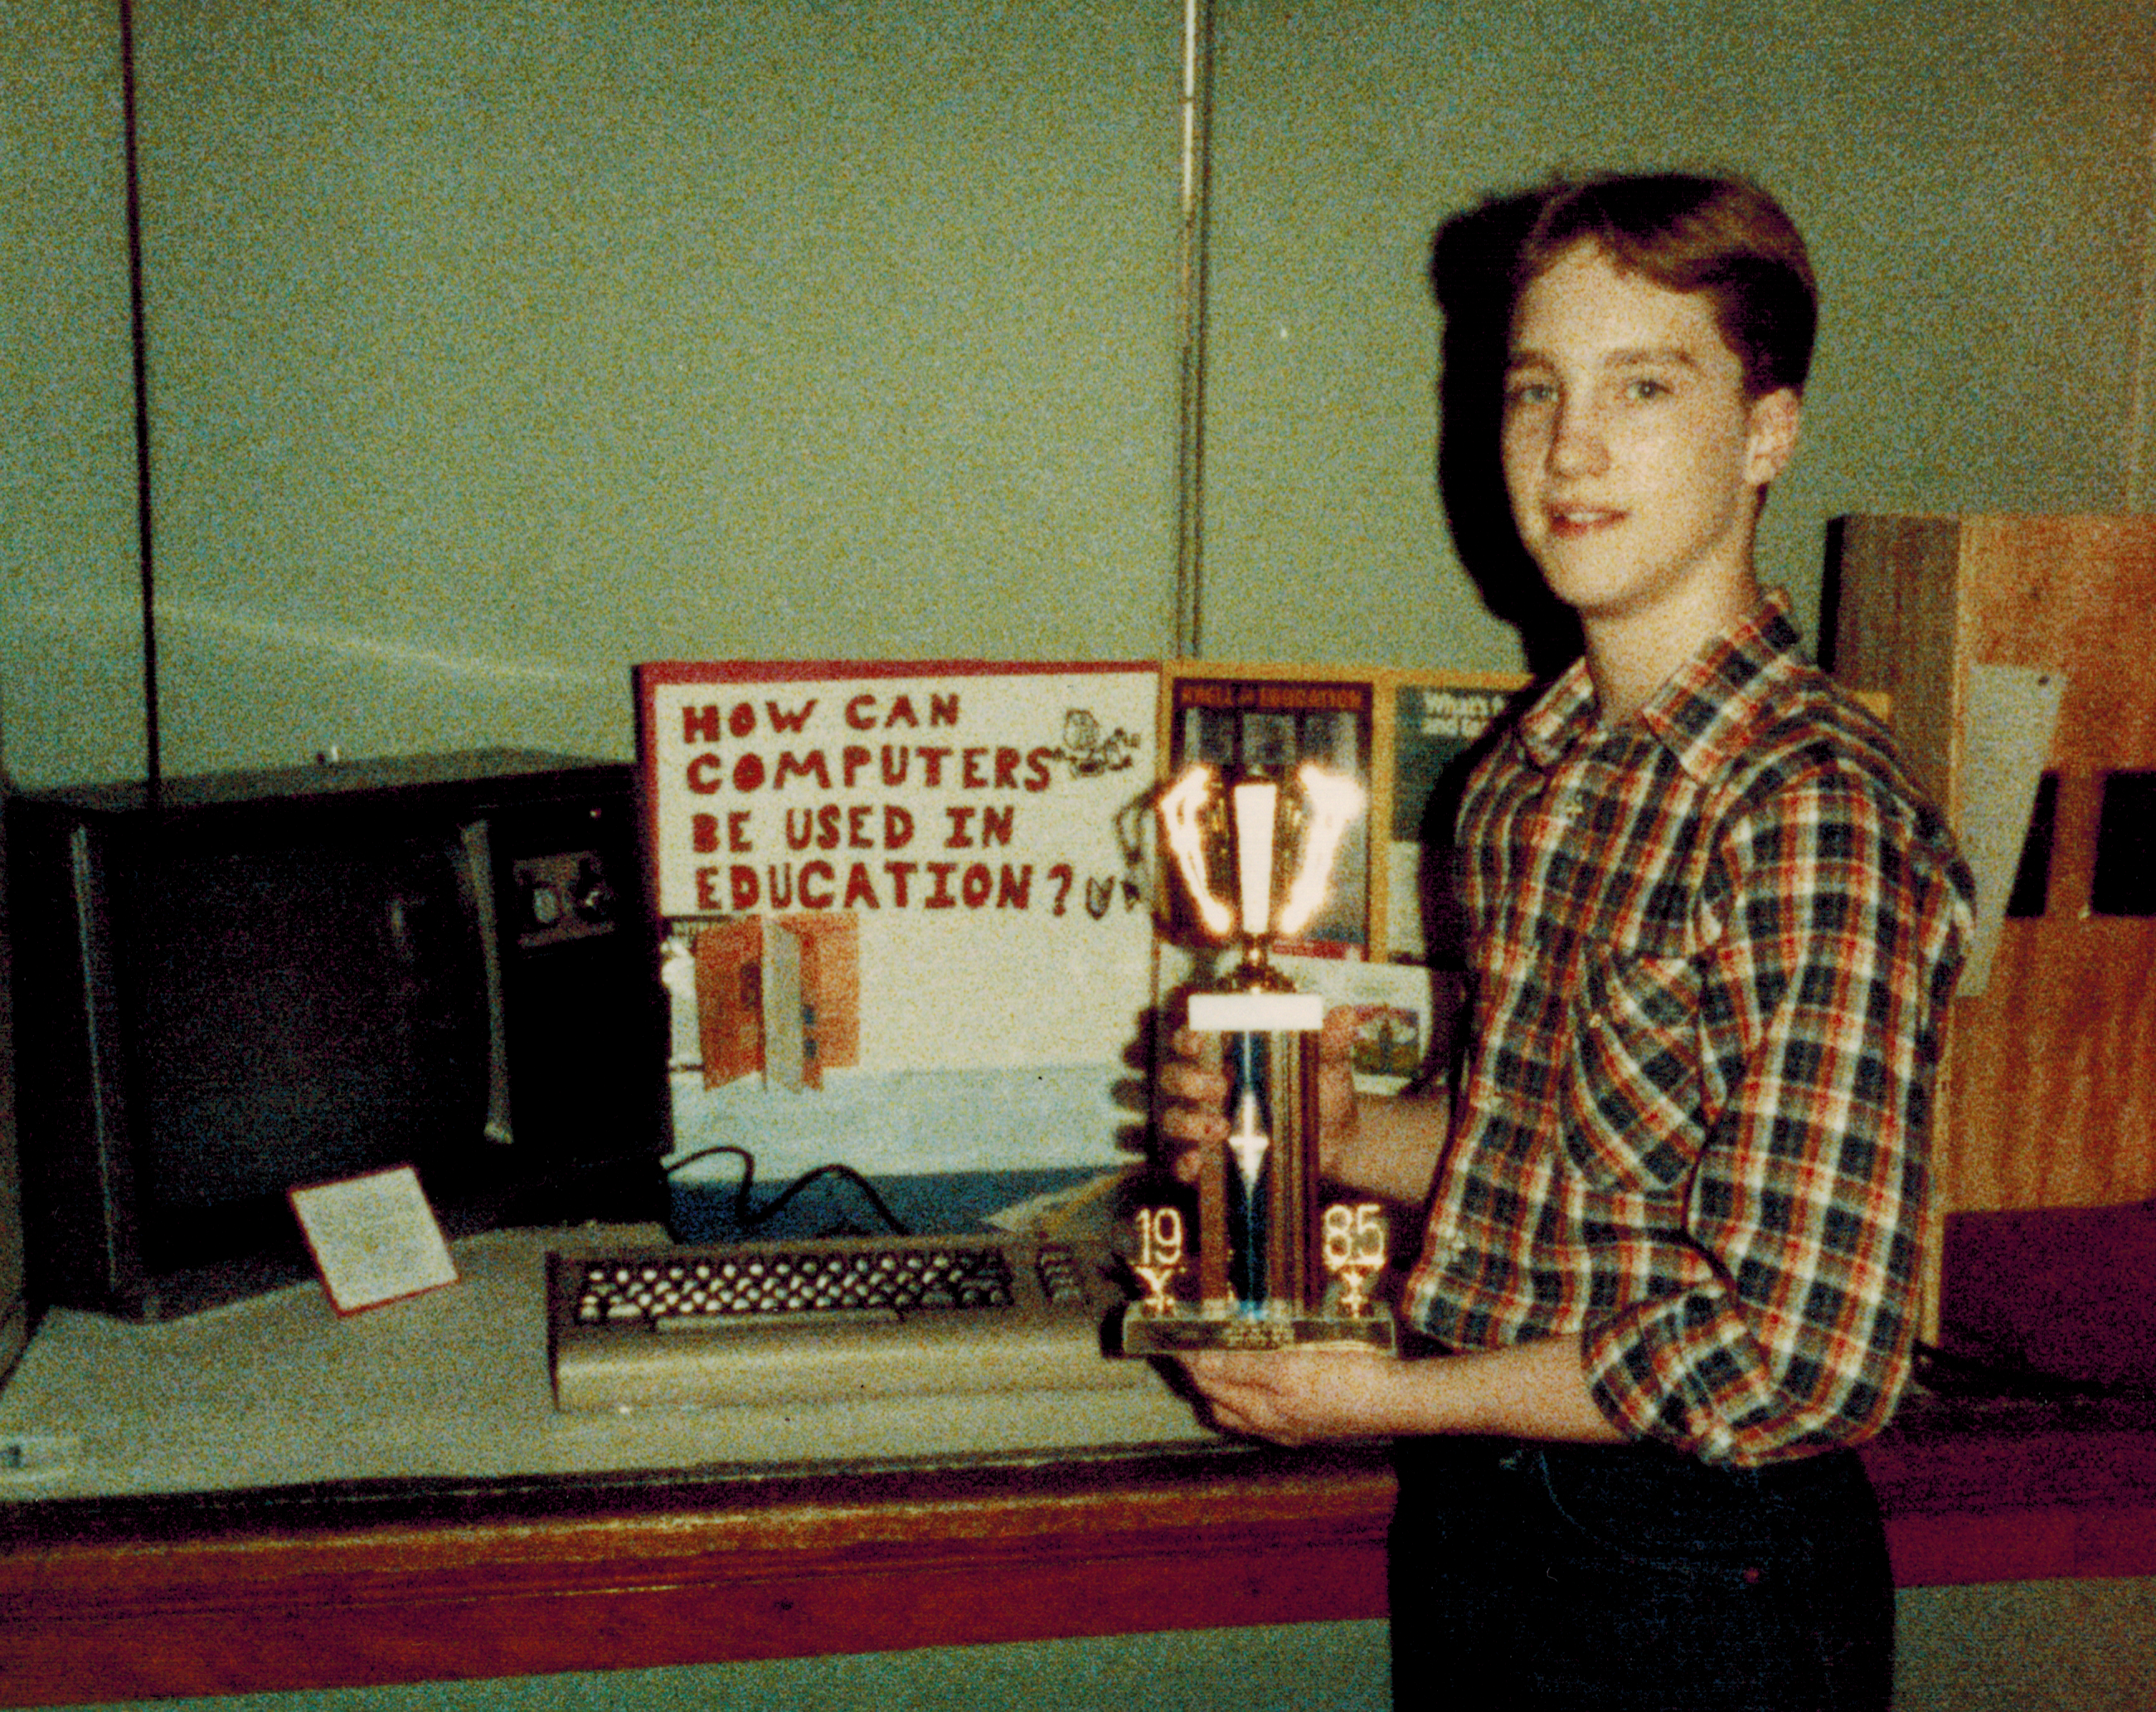 Ashley McGlone holding trophy at science fair in 1985